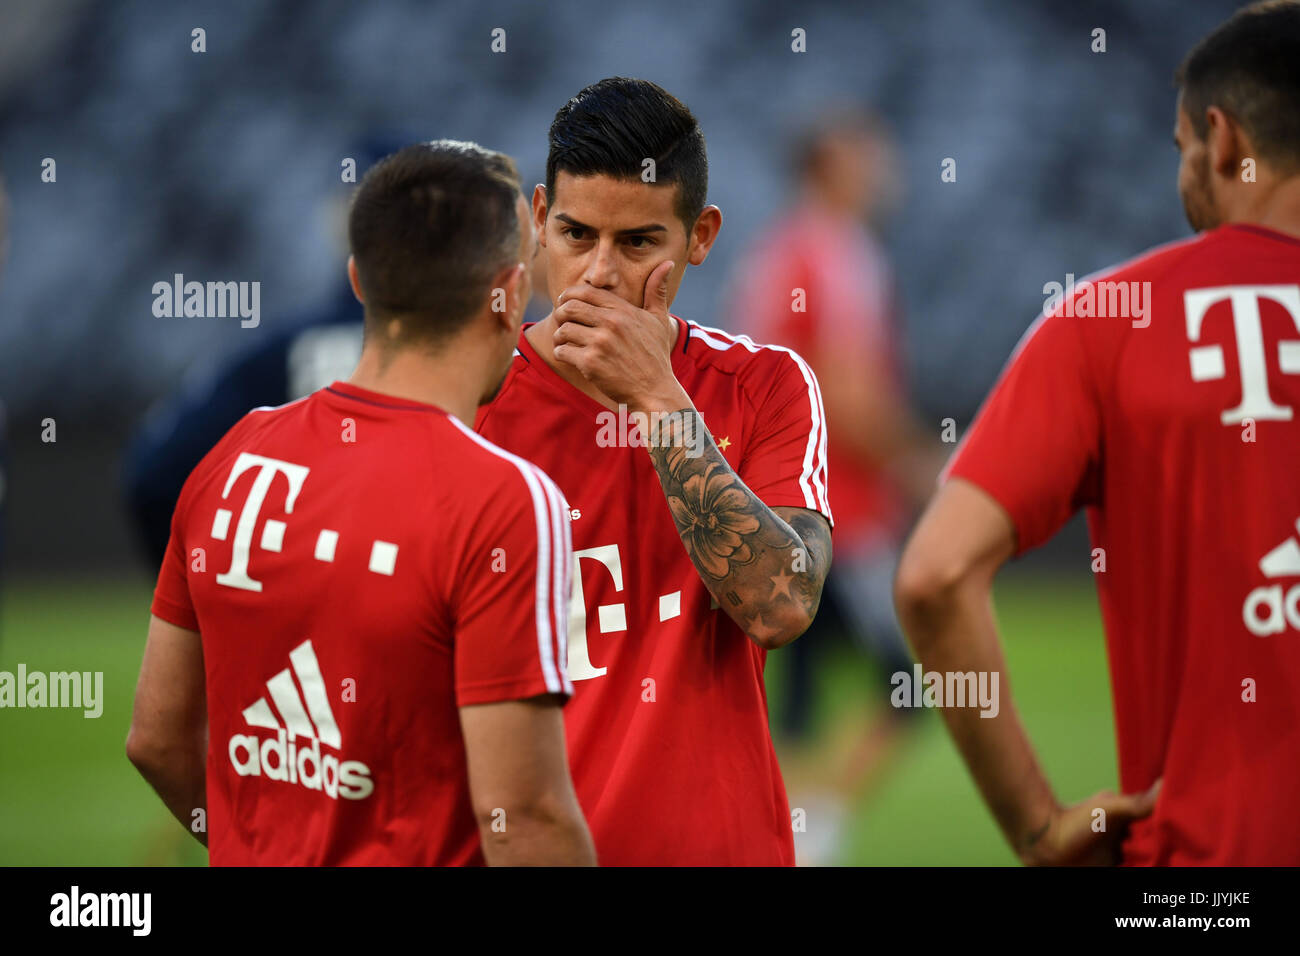 Shenzhen, China's Guangdong Province. 21st July, 2017. James Rodriguez (C) of Bayern Munich attends a training session prior to the 2017 International Champions Cup China against AC Milan in Shenzhen, south China's Guangdong Province, July 21, 2017. Credit: Guo Yong/Xinhua/Alamy Live News Stock Photo